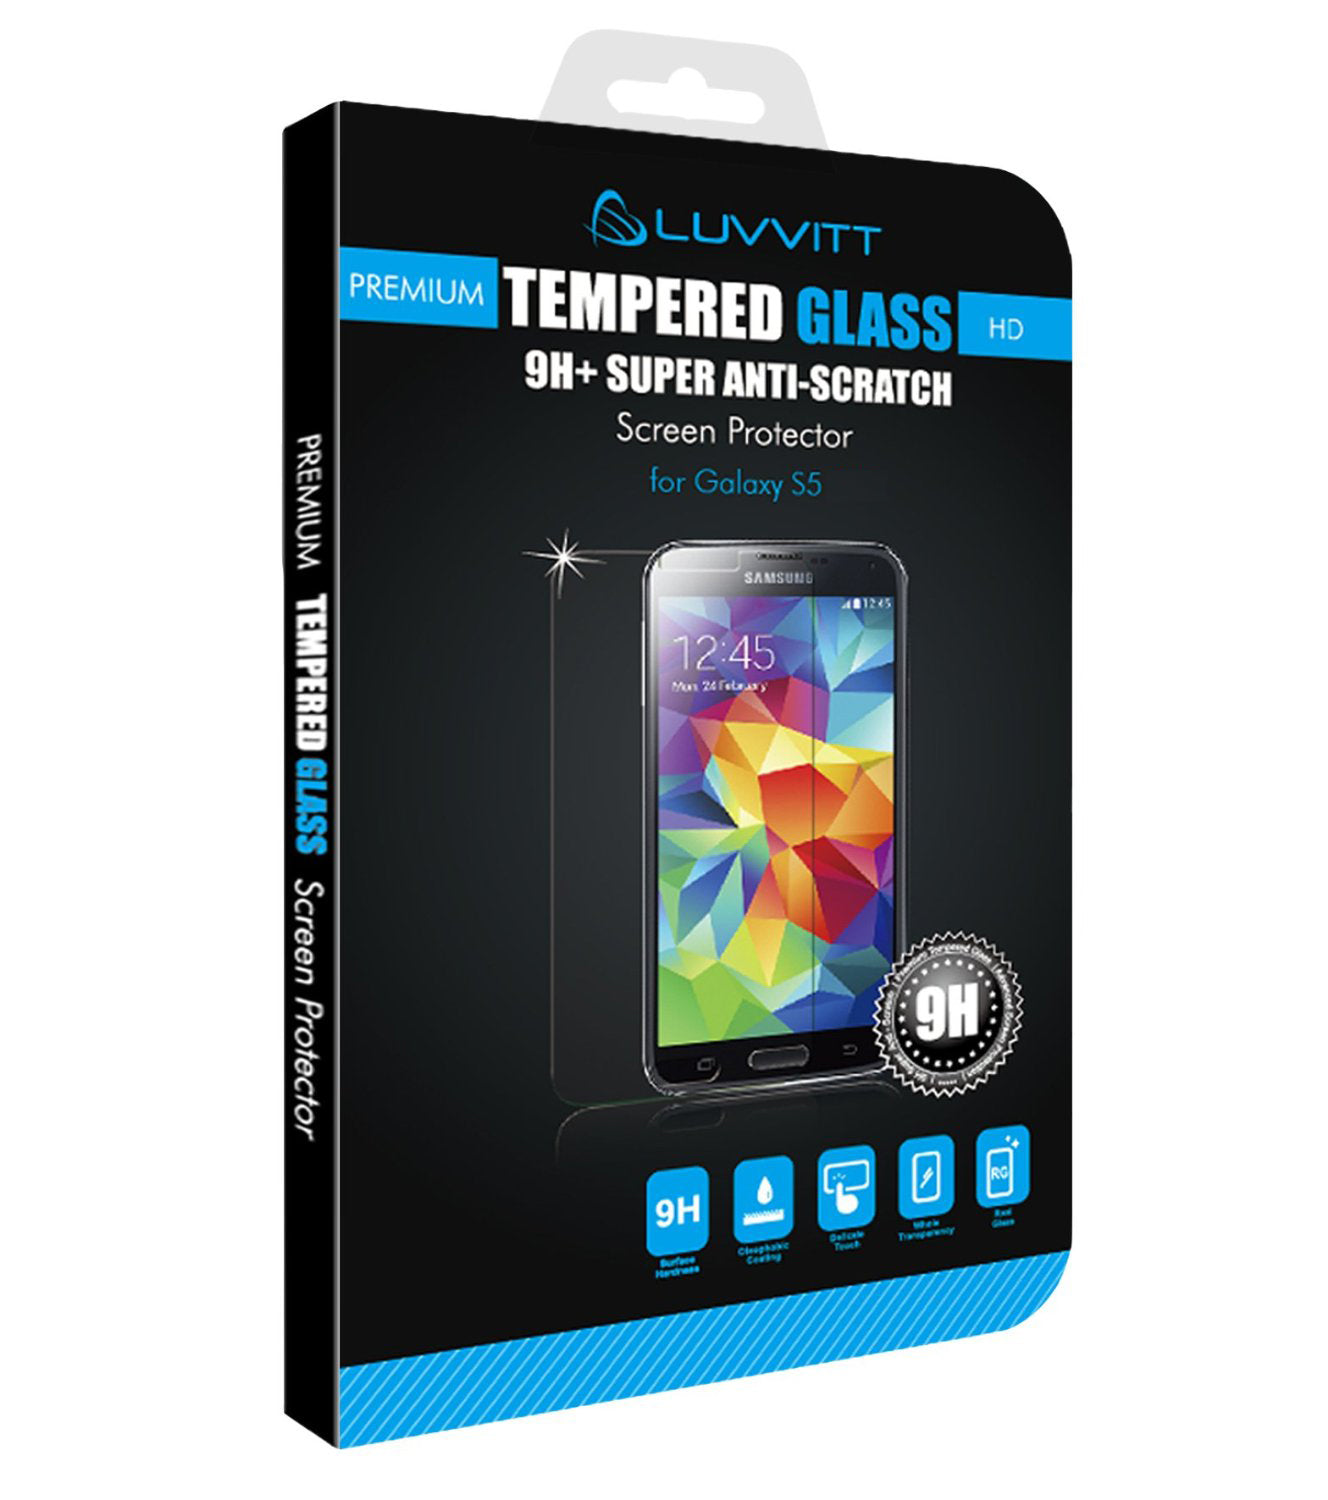 LUVVITT Galaxy S5 TEMPERED GLASS Screen Protector for Galaxy S5 -Crystal Clear